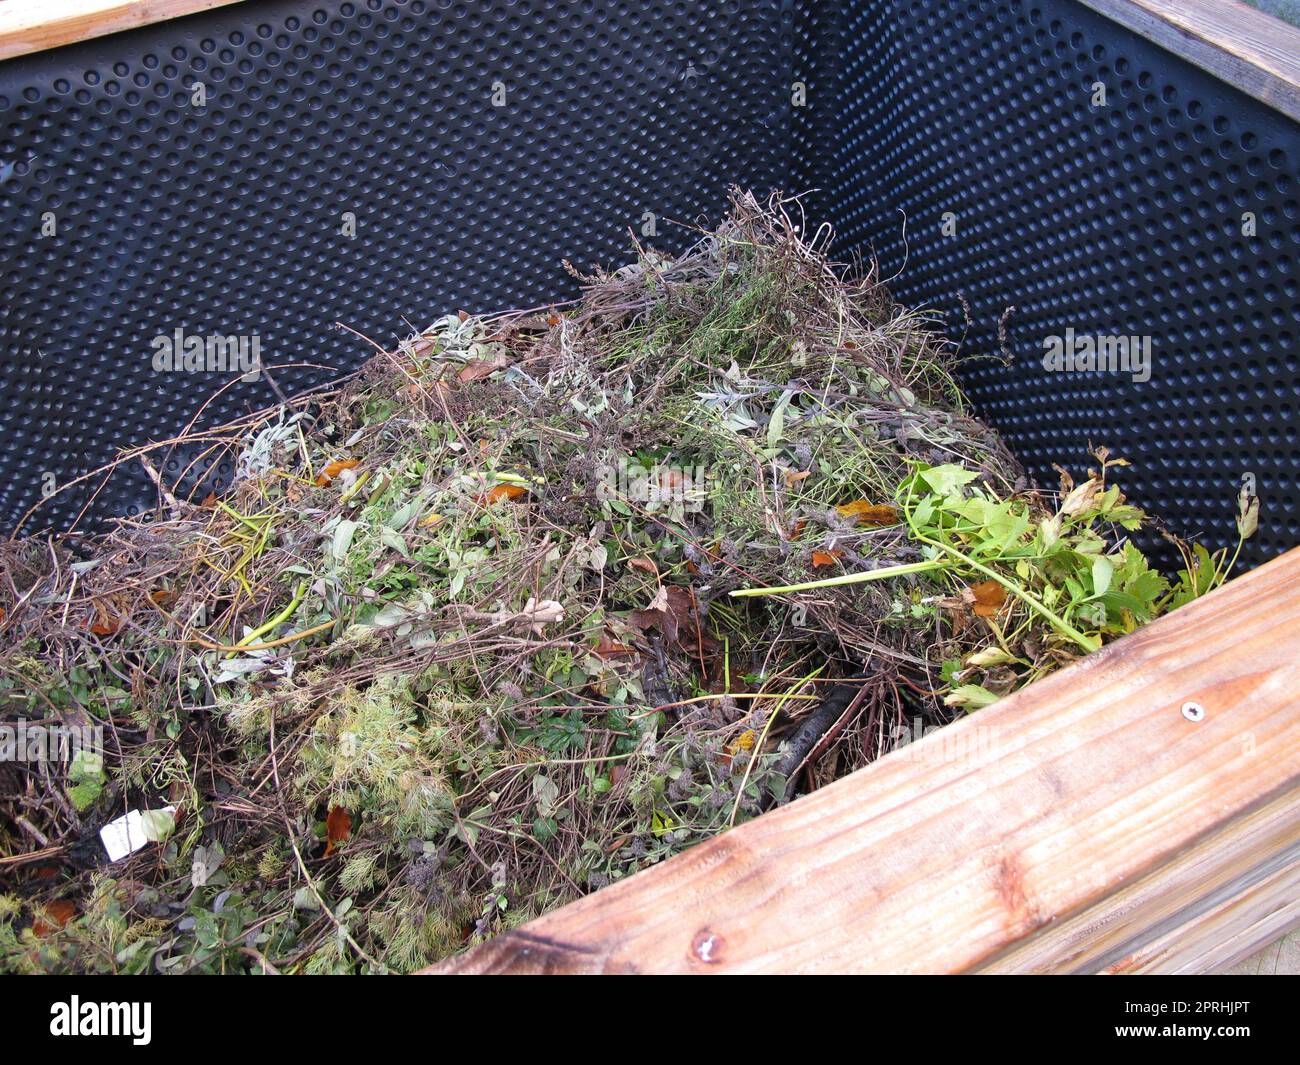 Raised bed filled up with organic material from the garden Stock Photo